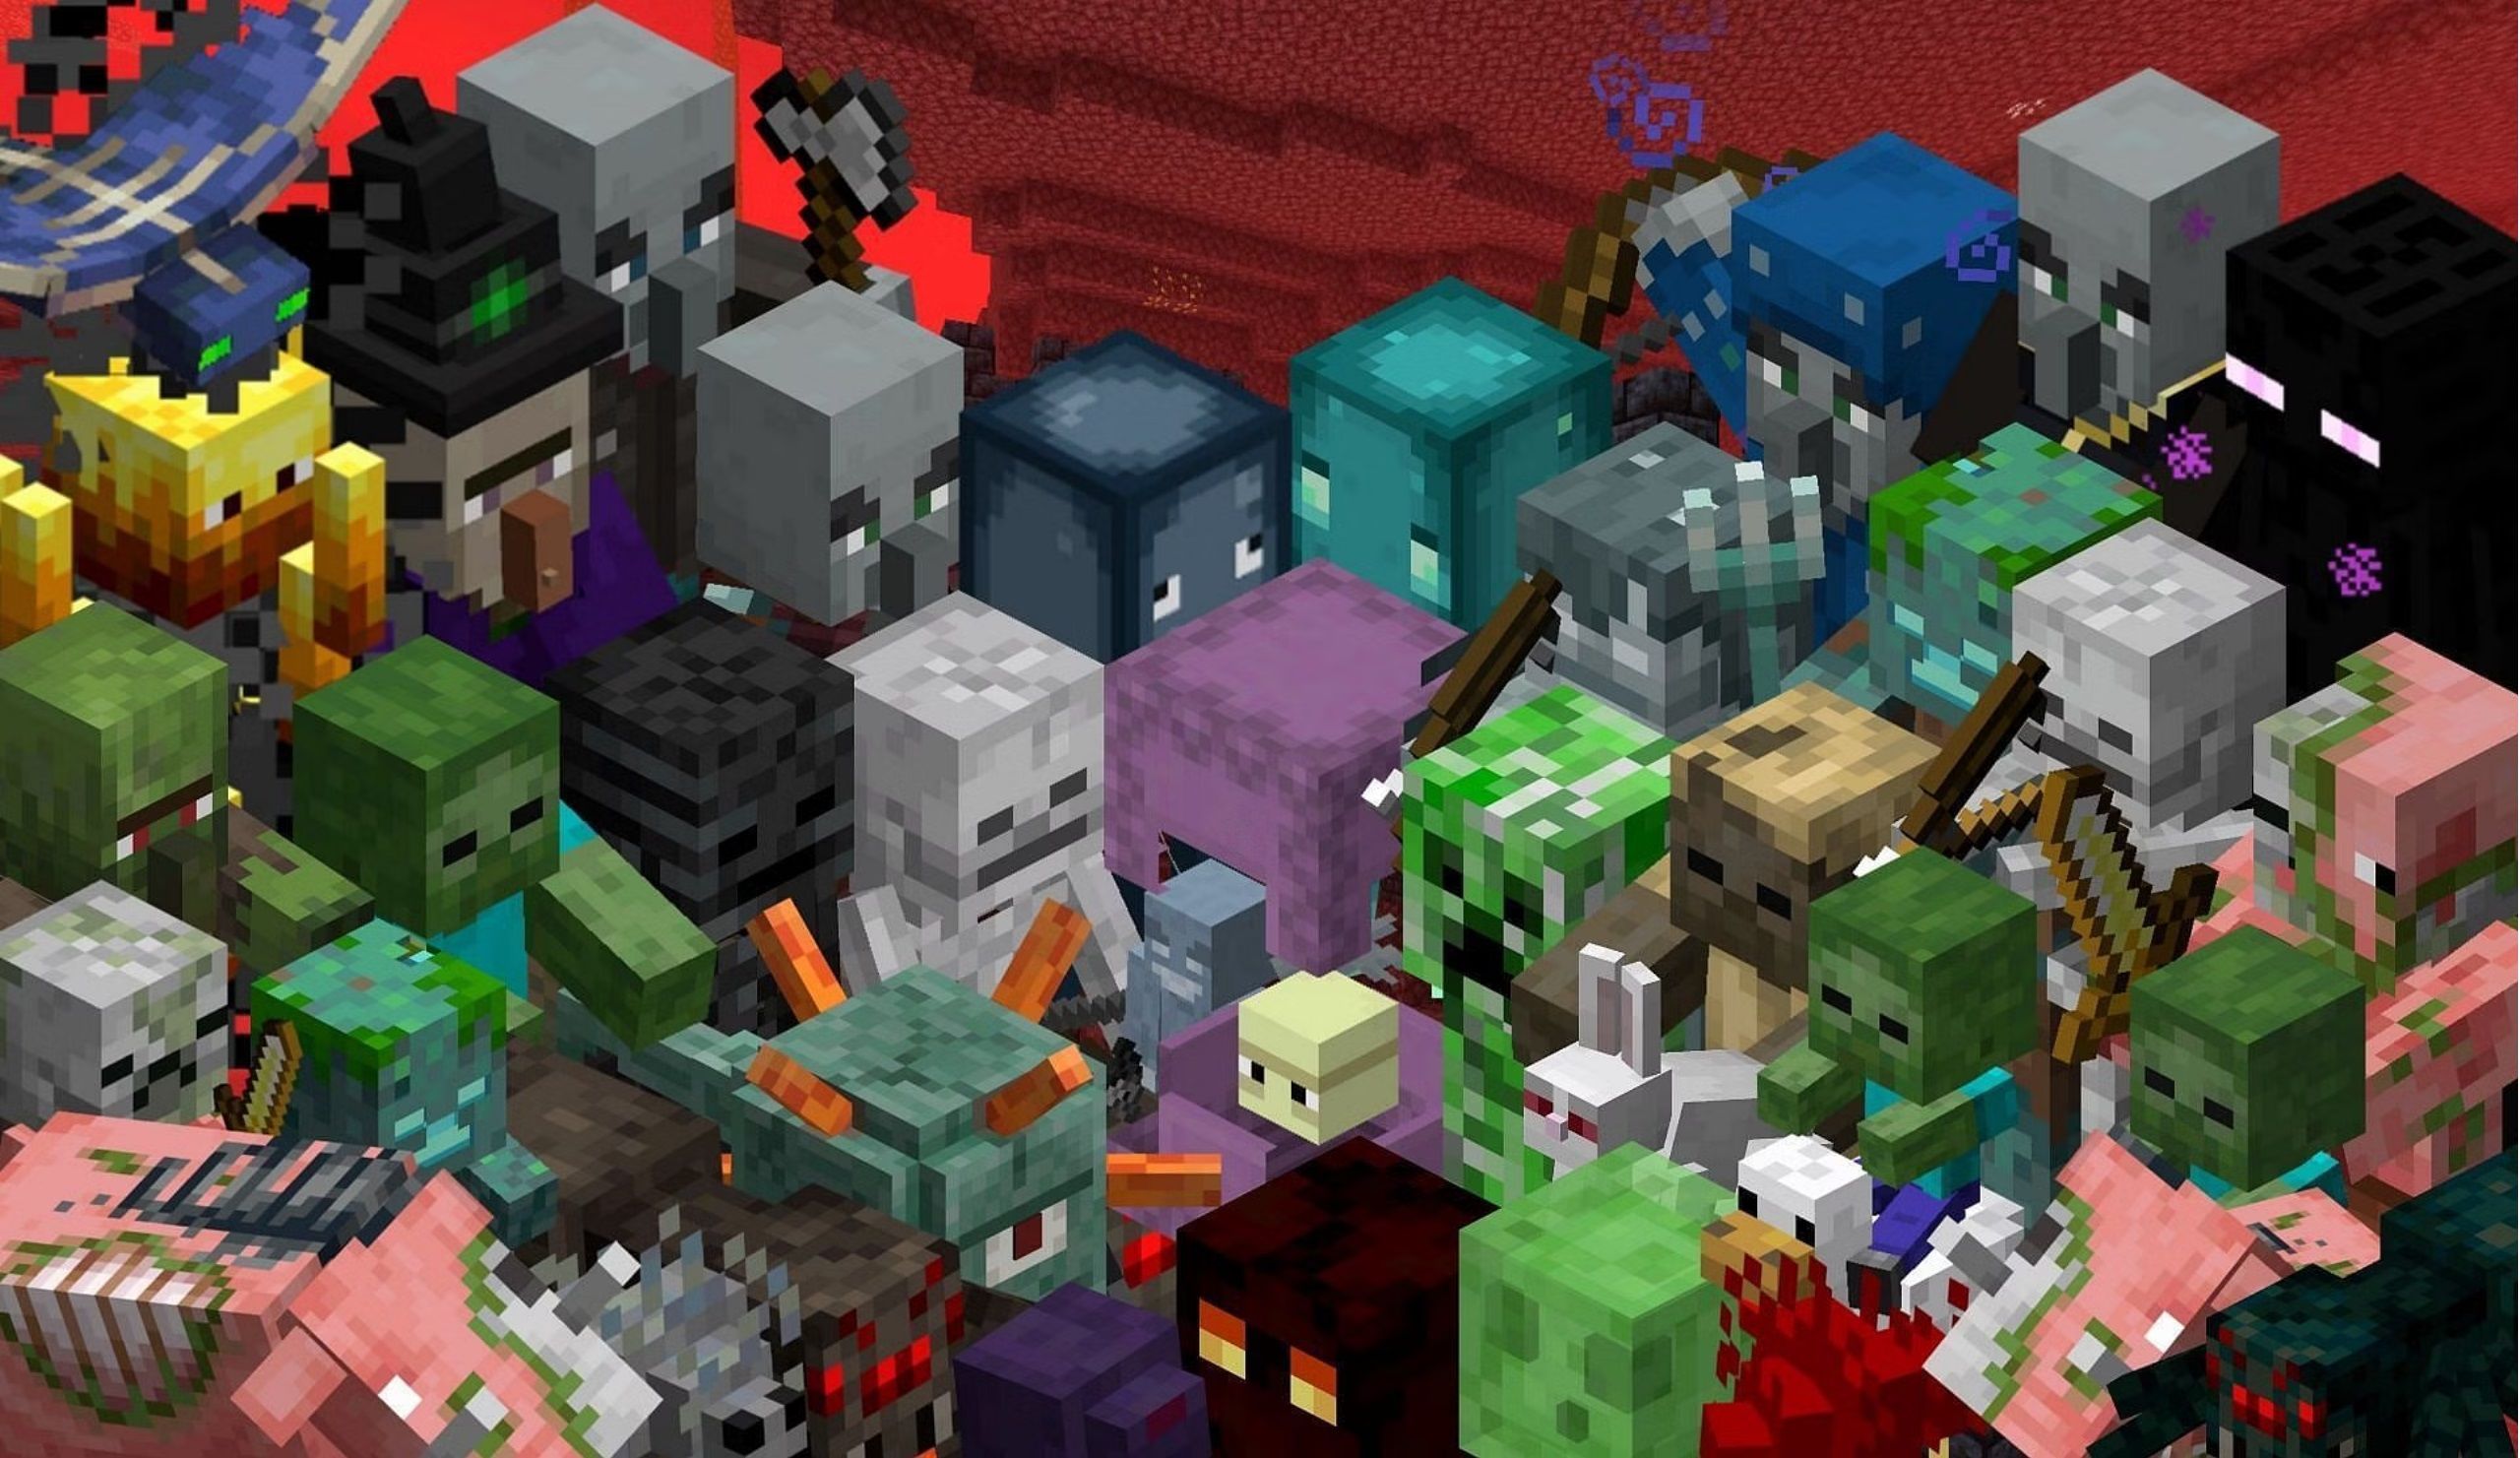 Lots of mobs from Minecraft